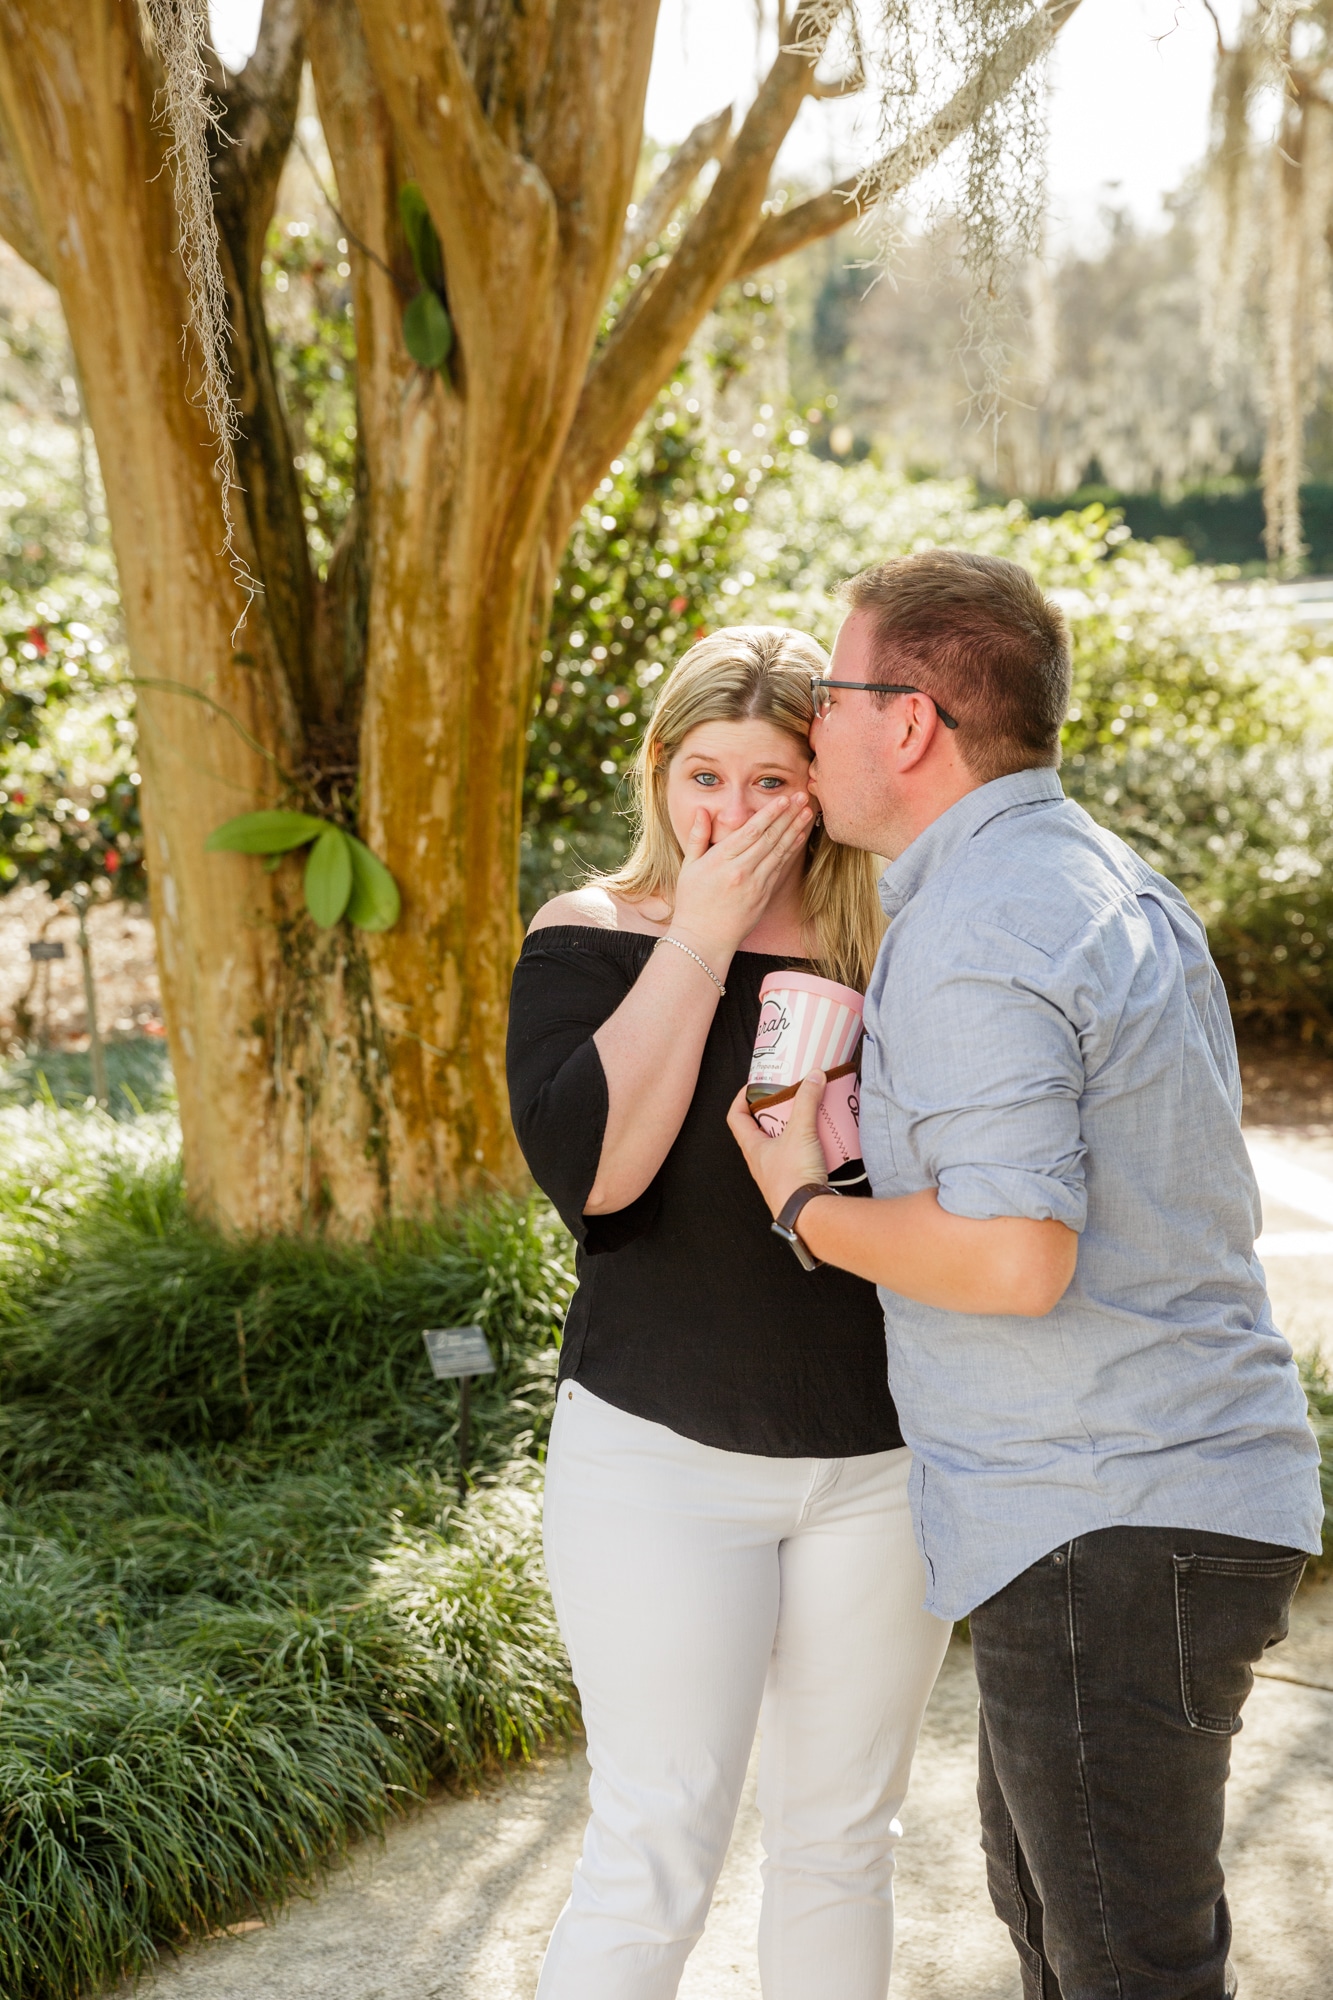 woman holds hand over mouth in shock while holding kelly's homemade ice cream marriage proposal container with custom proposal on it while man kisses her on the cheek